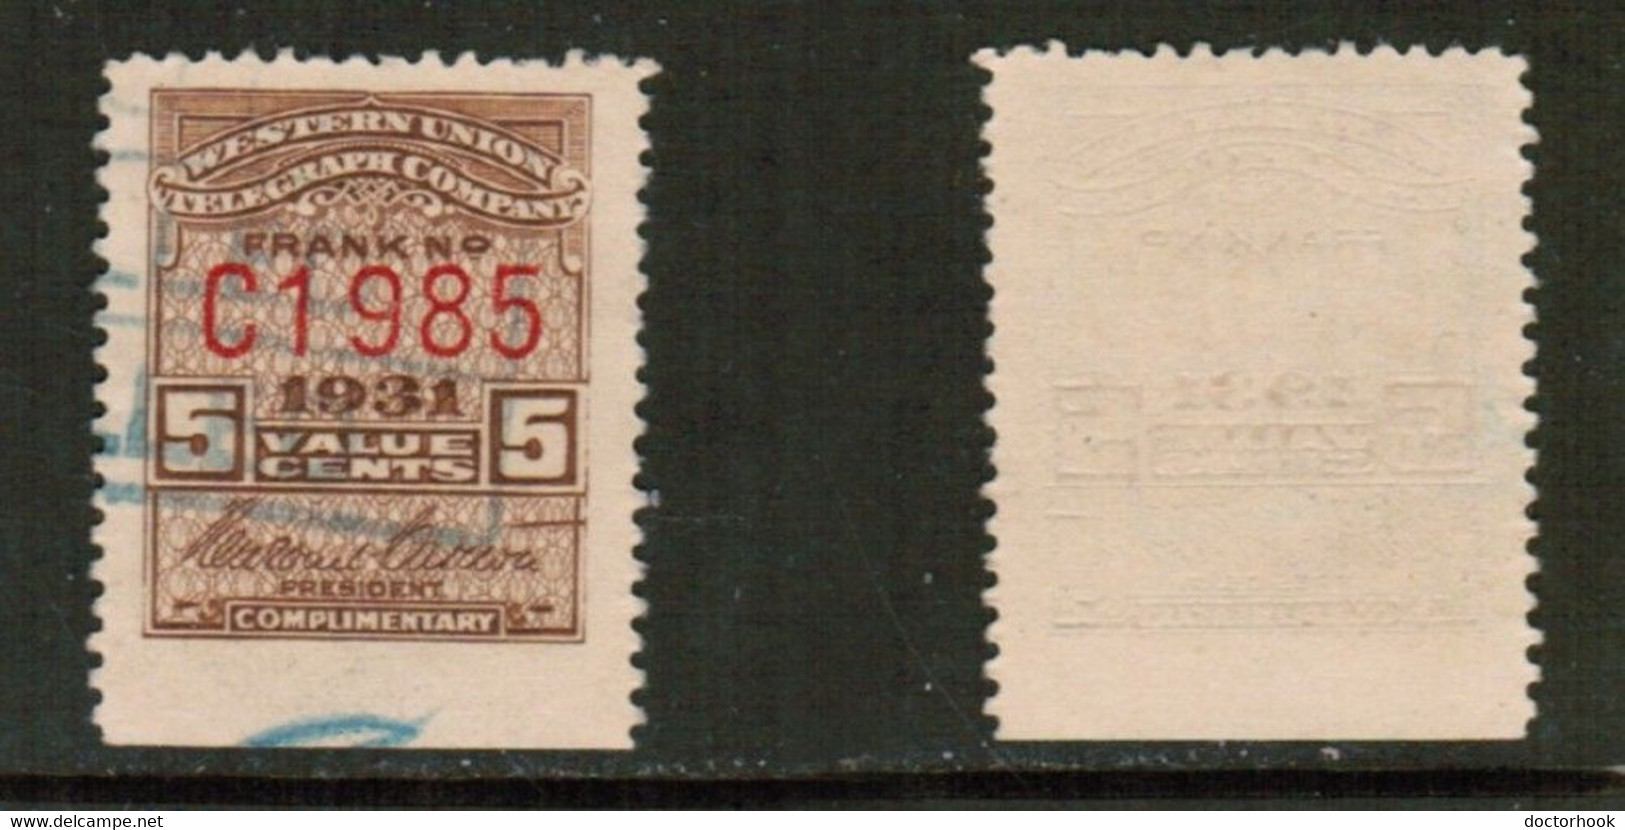 U.S.A.  1931---5 CENT WESTERN UNION TELEGRAPH STAMP USED (CONDITION AS PER SCAN) (Stamp Scan # 839-15) - Telégrafo